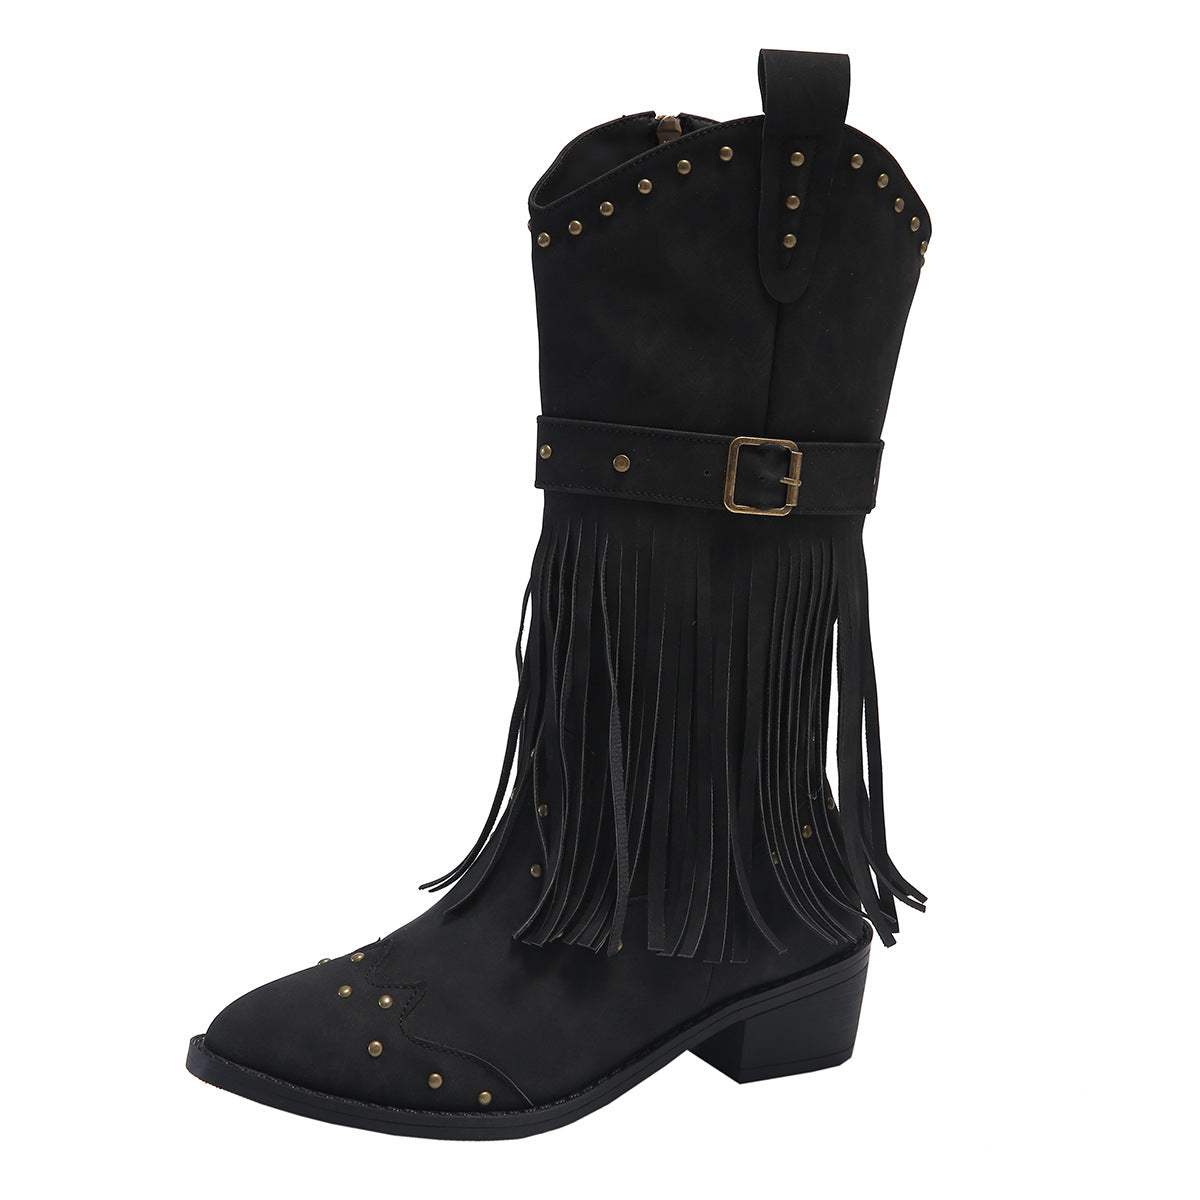 Retro Tassel Boots With Rivet Strap Buckle Design Shoes For Women Winter Footwear Fashion Mid-calf Square Heel Knight Western Boots